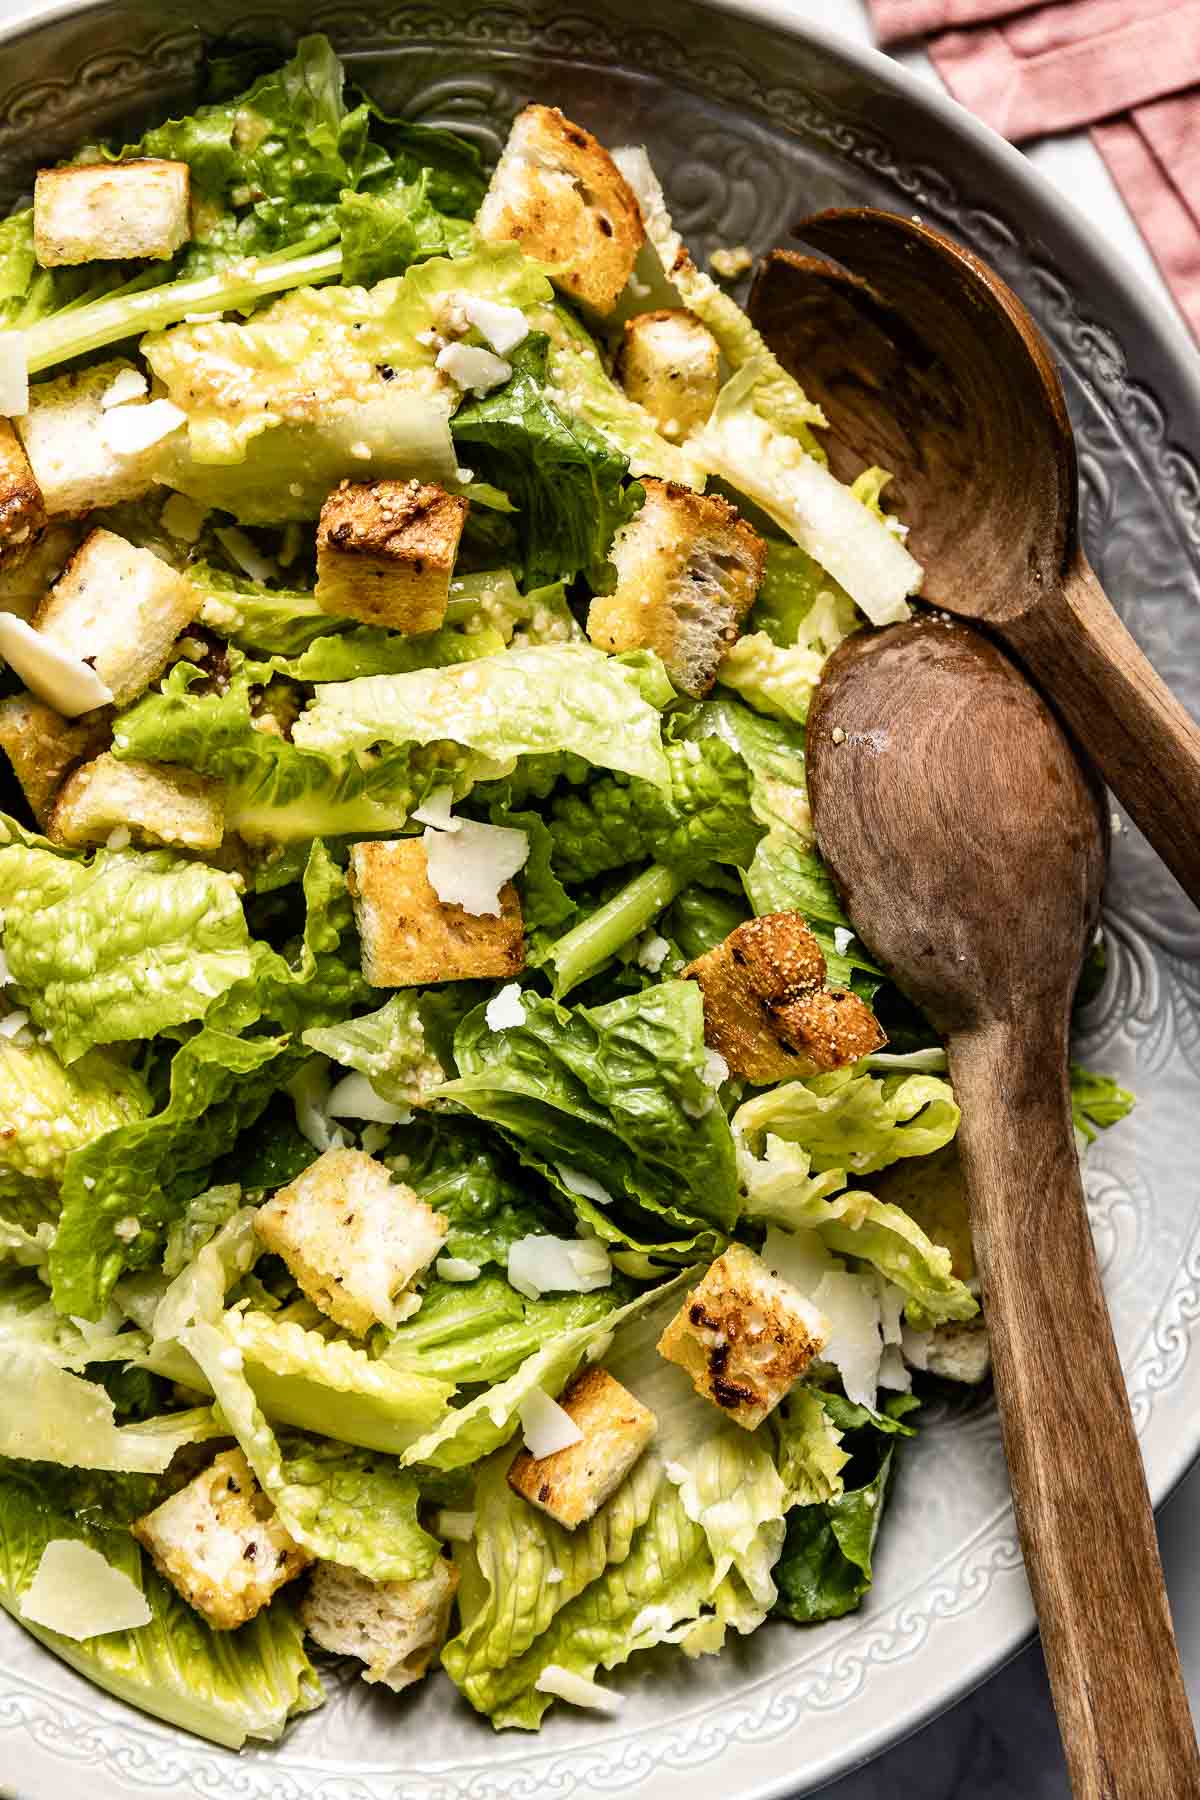 Caesar salad in a bowl from the top view